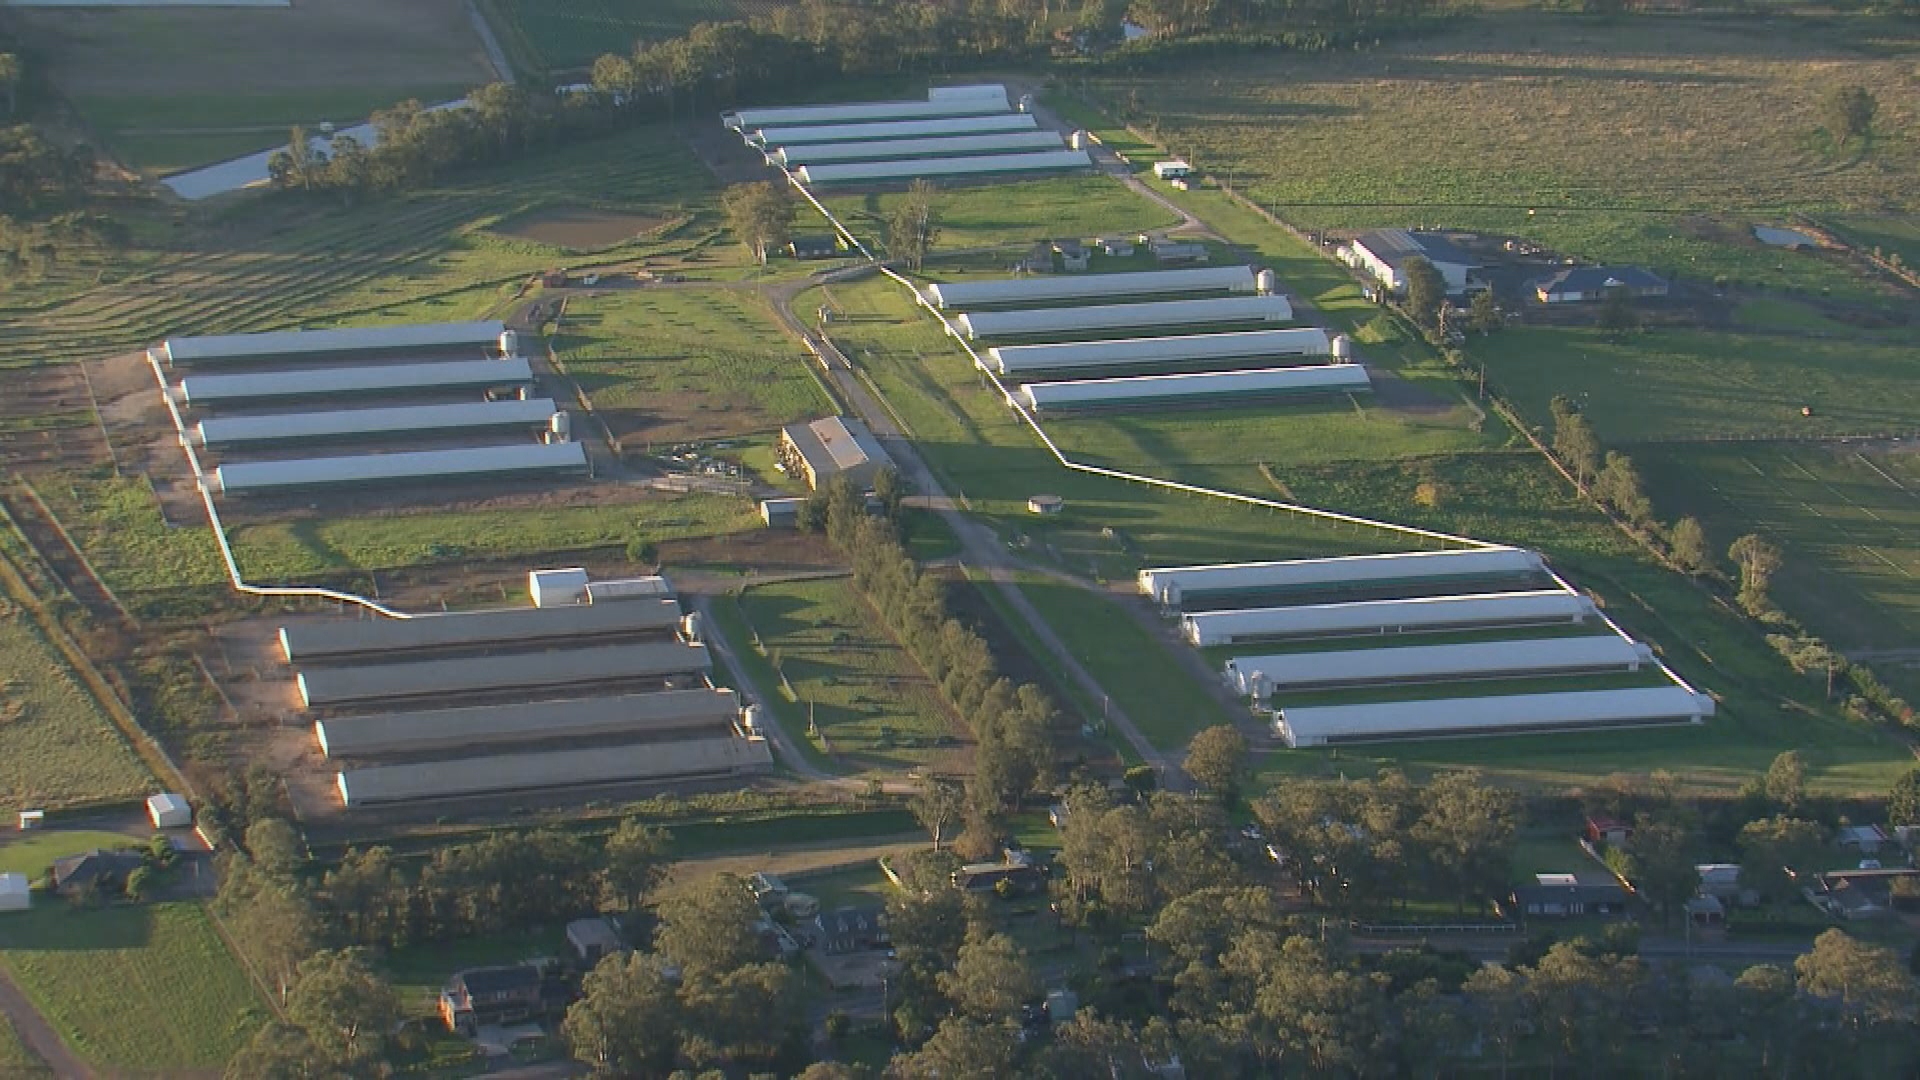 Bird flu has been detected at a commercial egg farm in Sydney's Hawkesbury region.